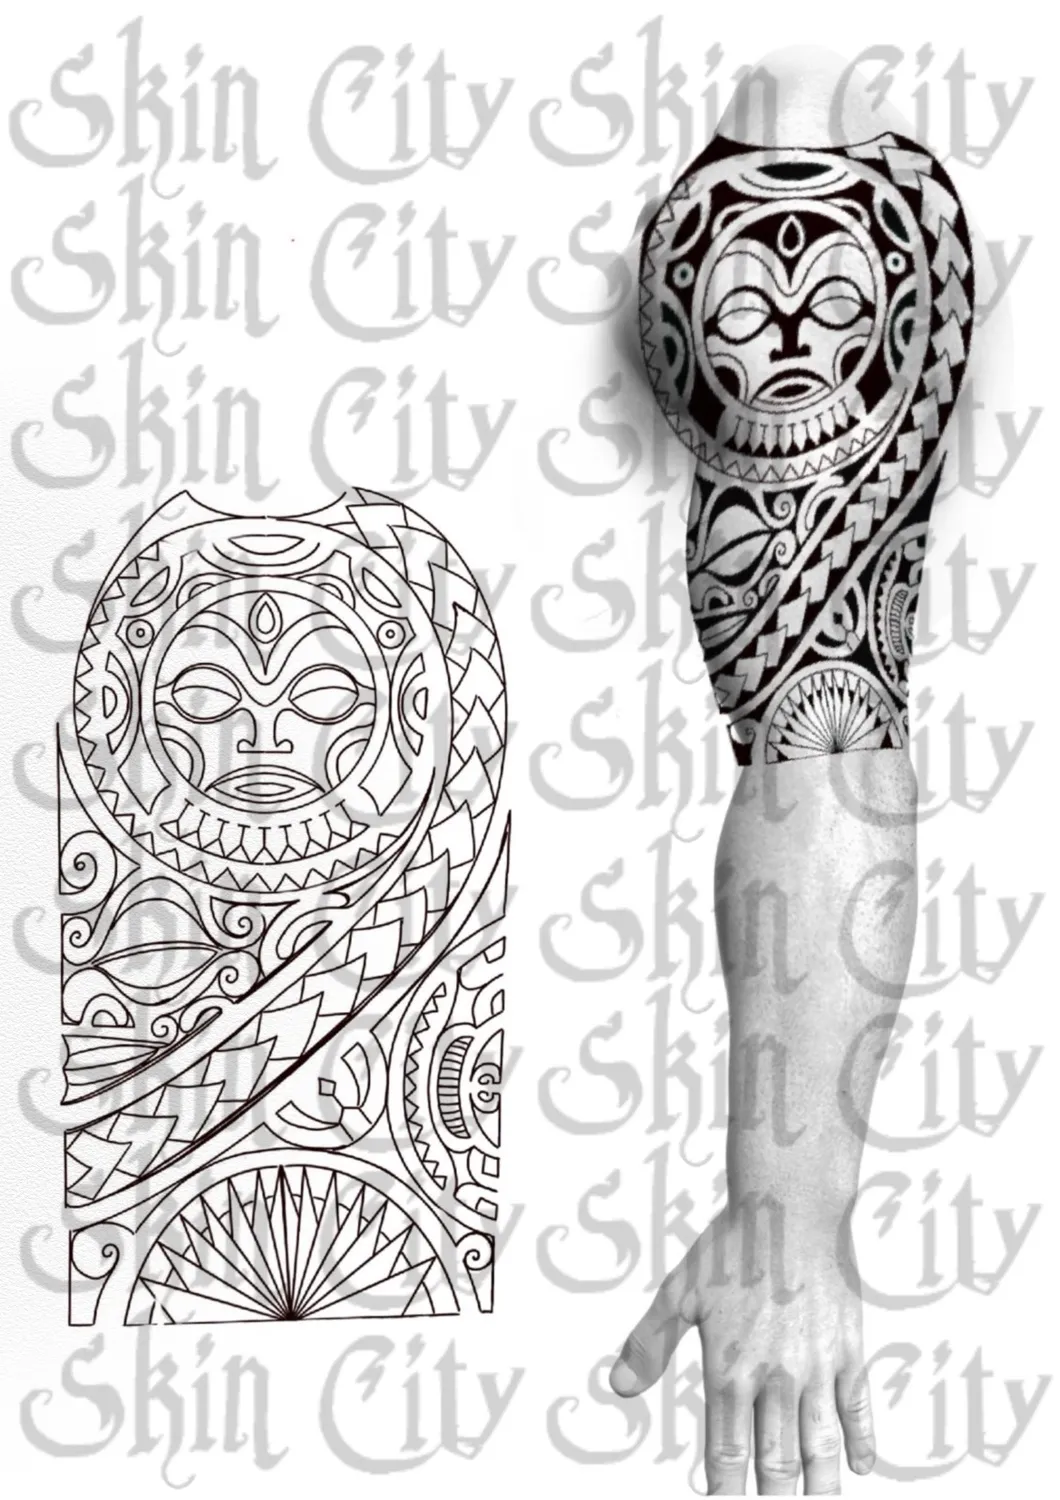 Skin City Tattoo & Piercing Cover Up Tattoo